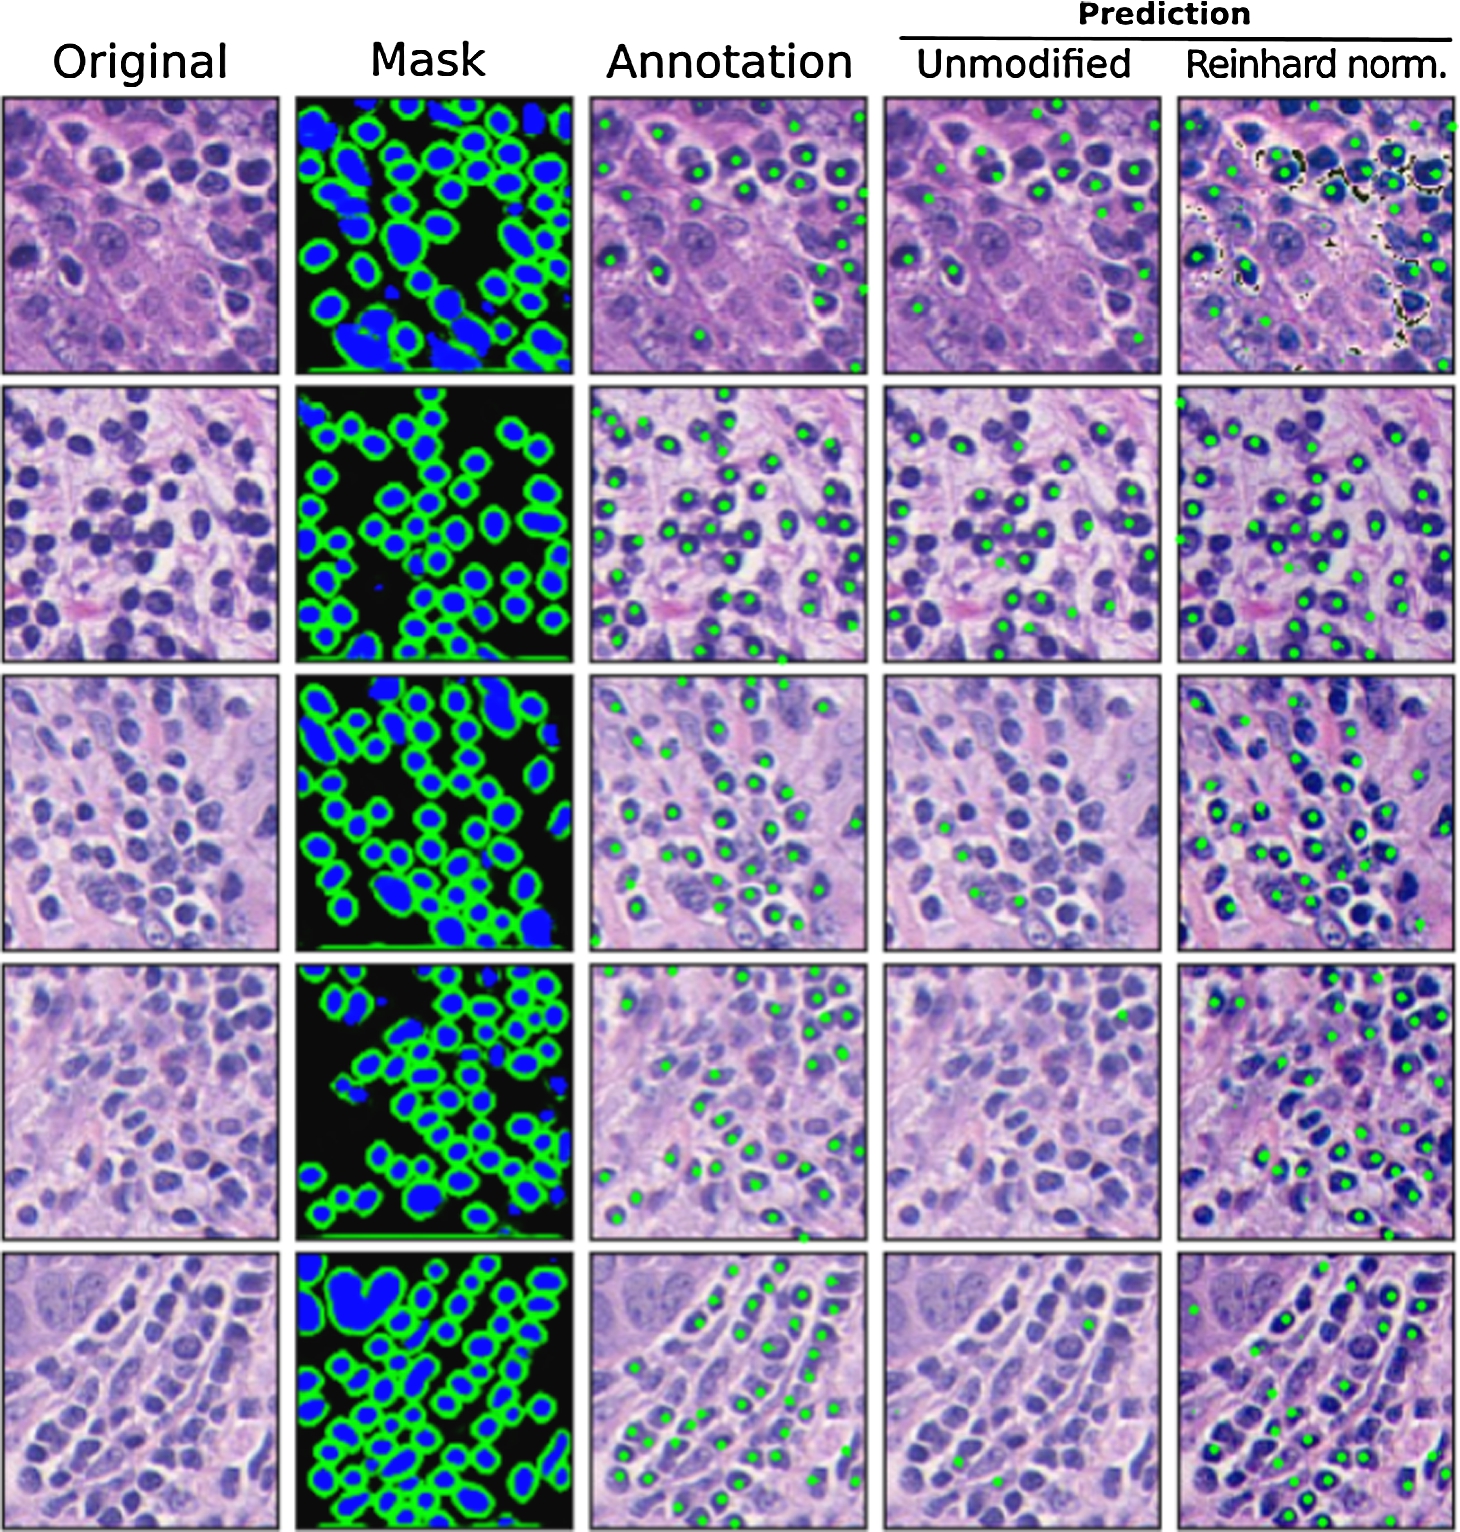 Exemplary 5 testing images from breast cancer lymphocyte dataset (Janowczyk and Madabhushi, 2016) with corresponding lymphocyte identification model outputs. From left to right: 1st column- original testing image from the lymphocyte dataset. 2nd column: nuclei segmentation masks predicted by autoencoder. 3rd column: Expert pathologist’s annotation supplied in the dataset. 4th column: lymphocyte classifier result (if the nucleus was predicted as a lymphocyte, its centre was labelled with a green dot). 5th column: lymphocyte classifier result after Reinhard stain normalization.